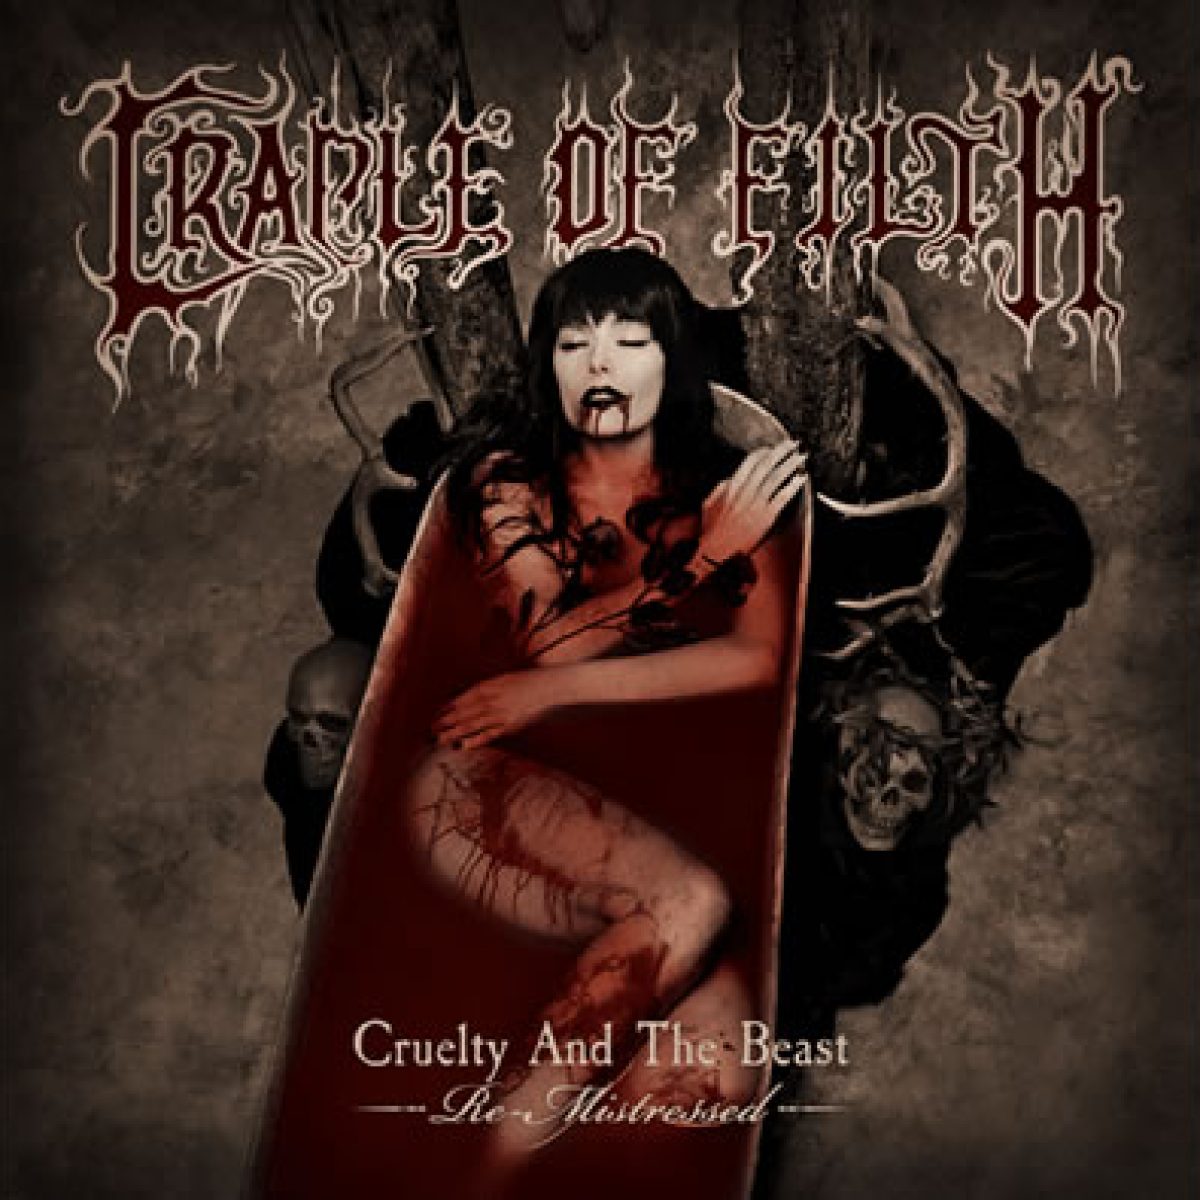 Cradle Of Filth, Cruelty and the Beast